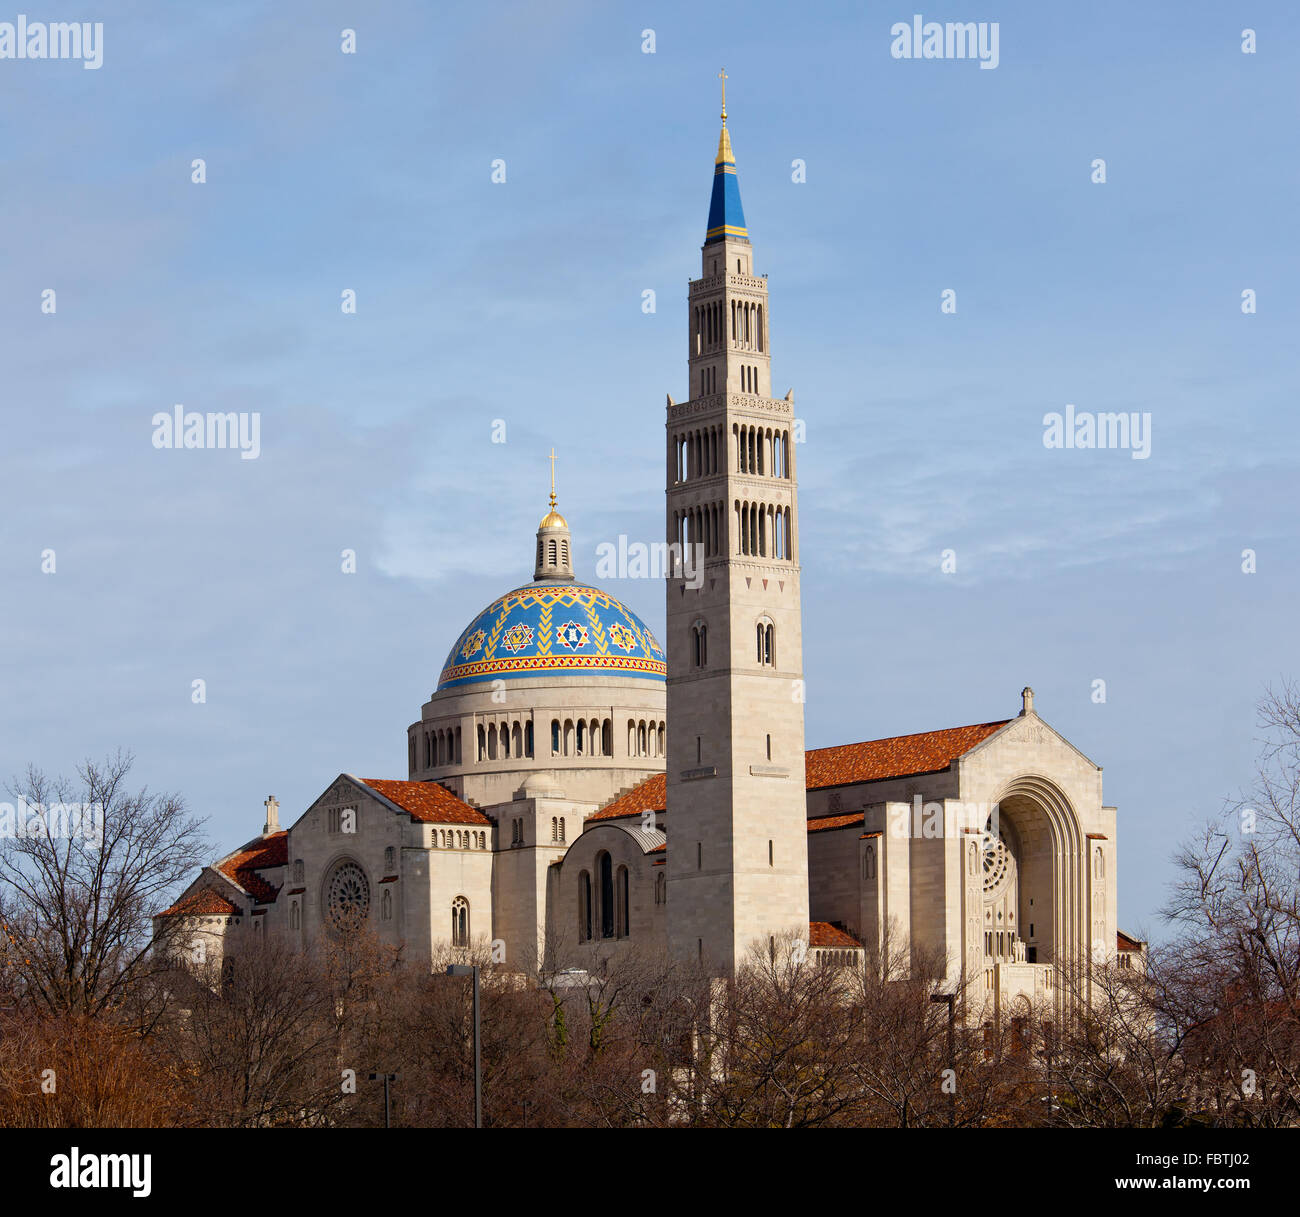 Basilica of the National Shrine of the Immaculate Conception Stock Photo